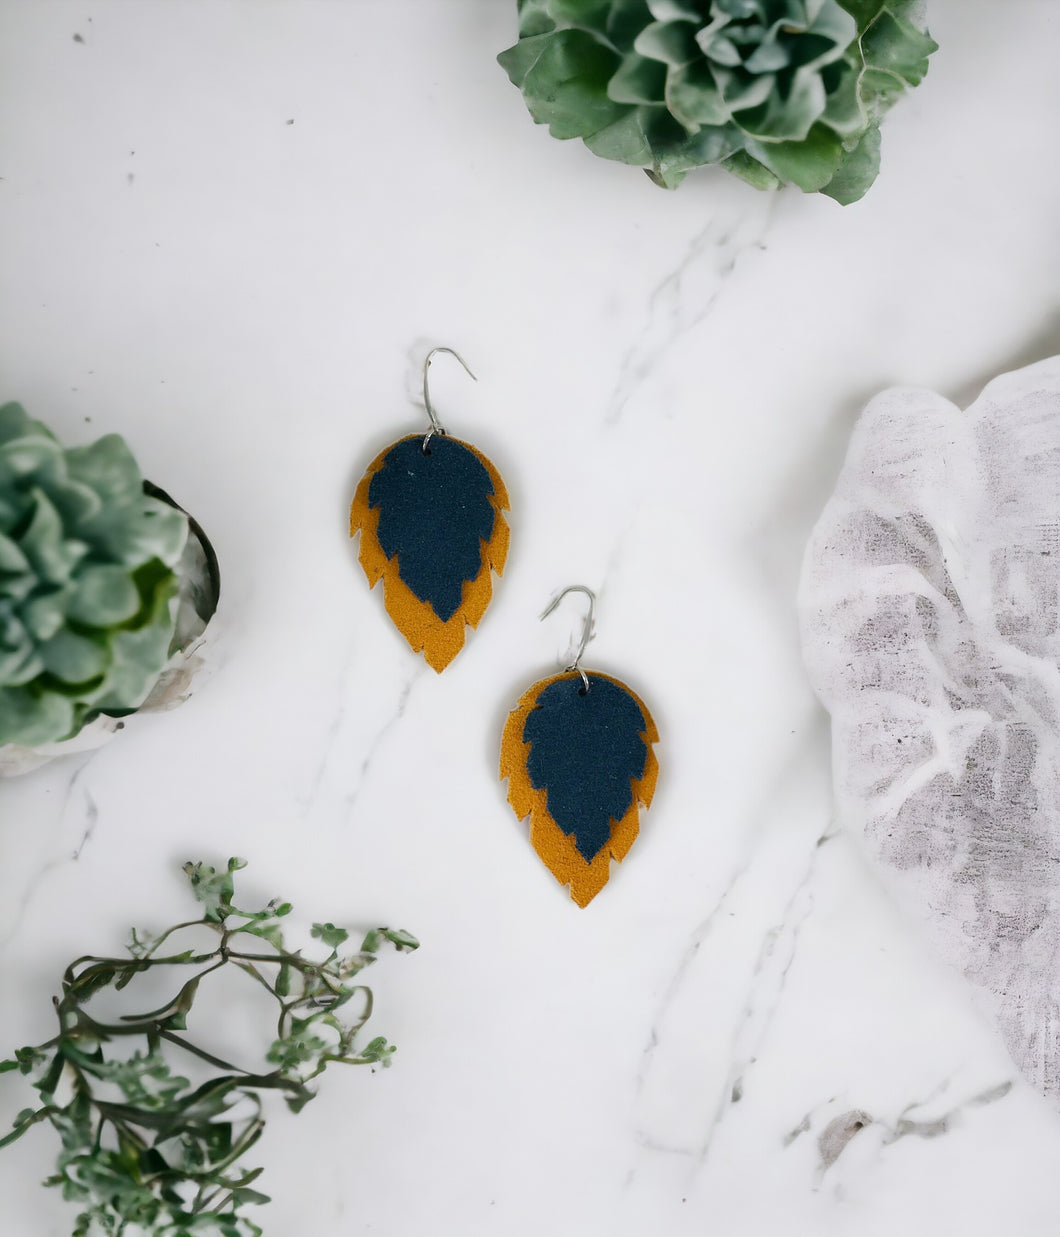 Mustard and Teal Suede Leather Earrings - E19-1165